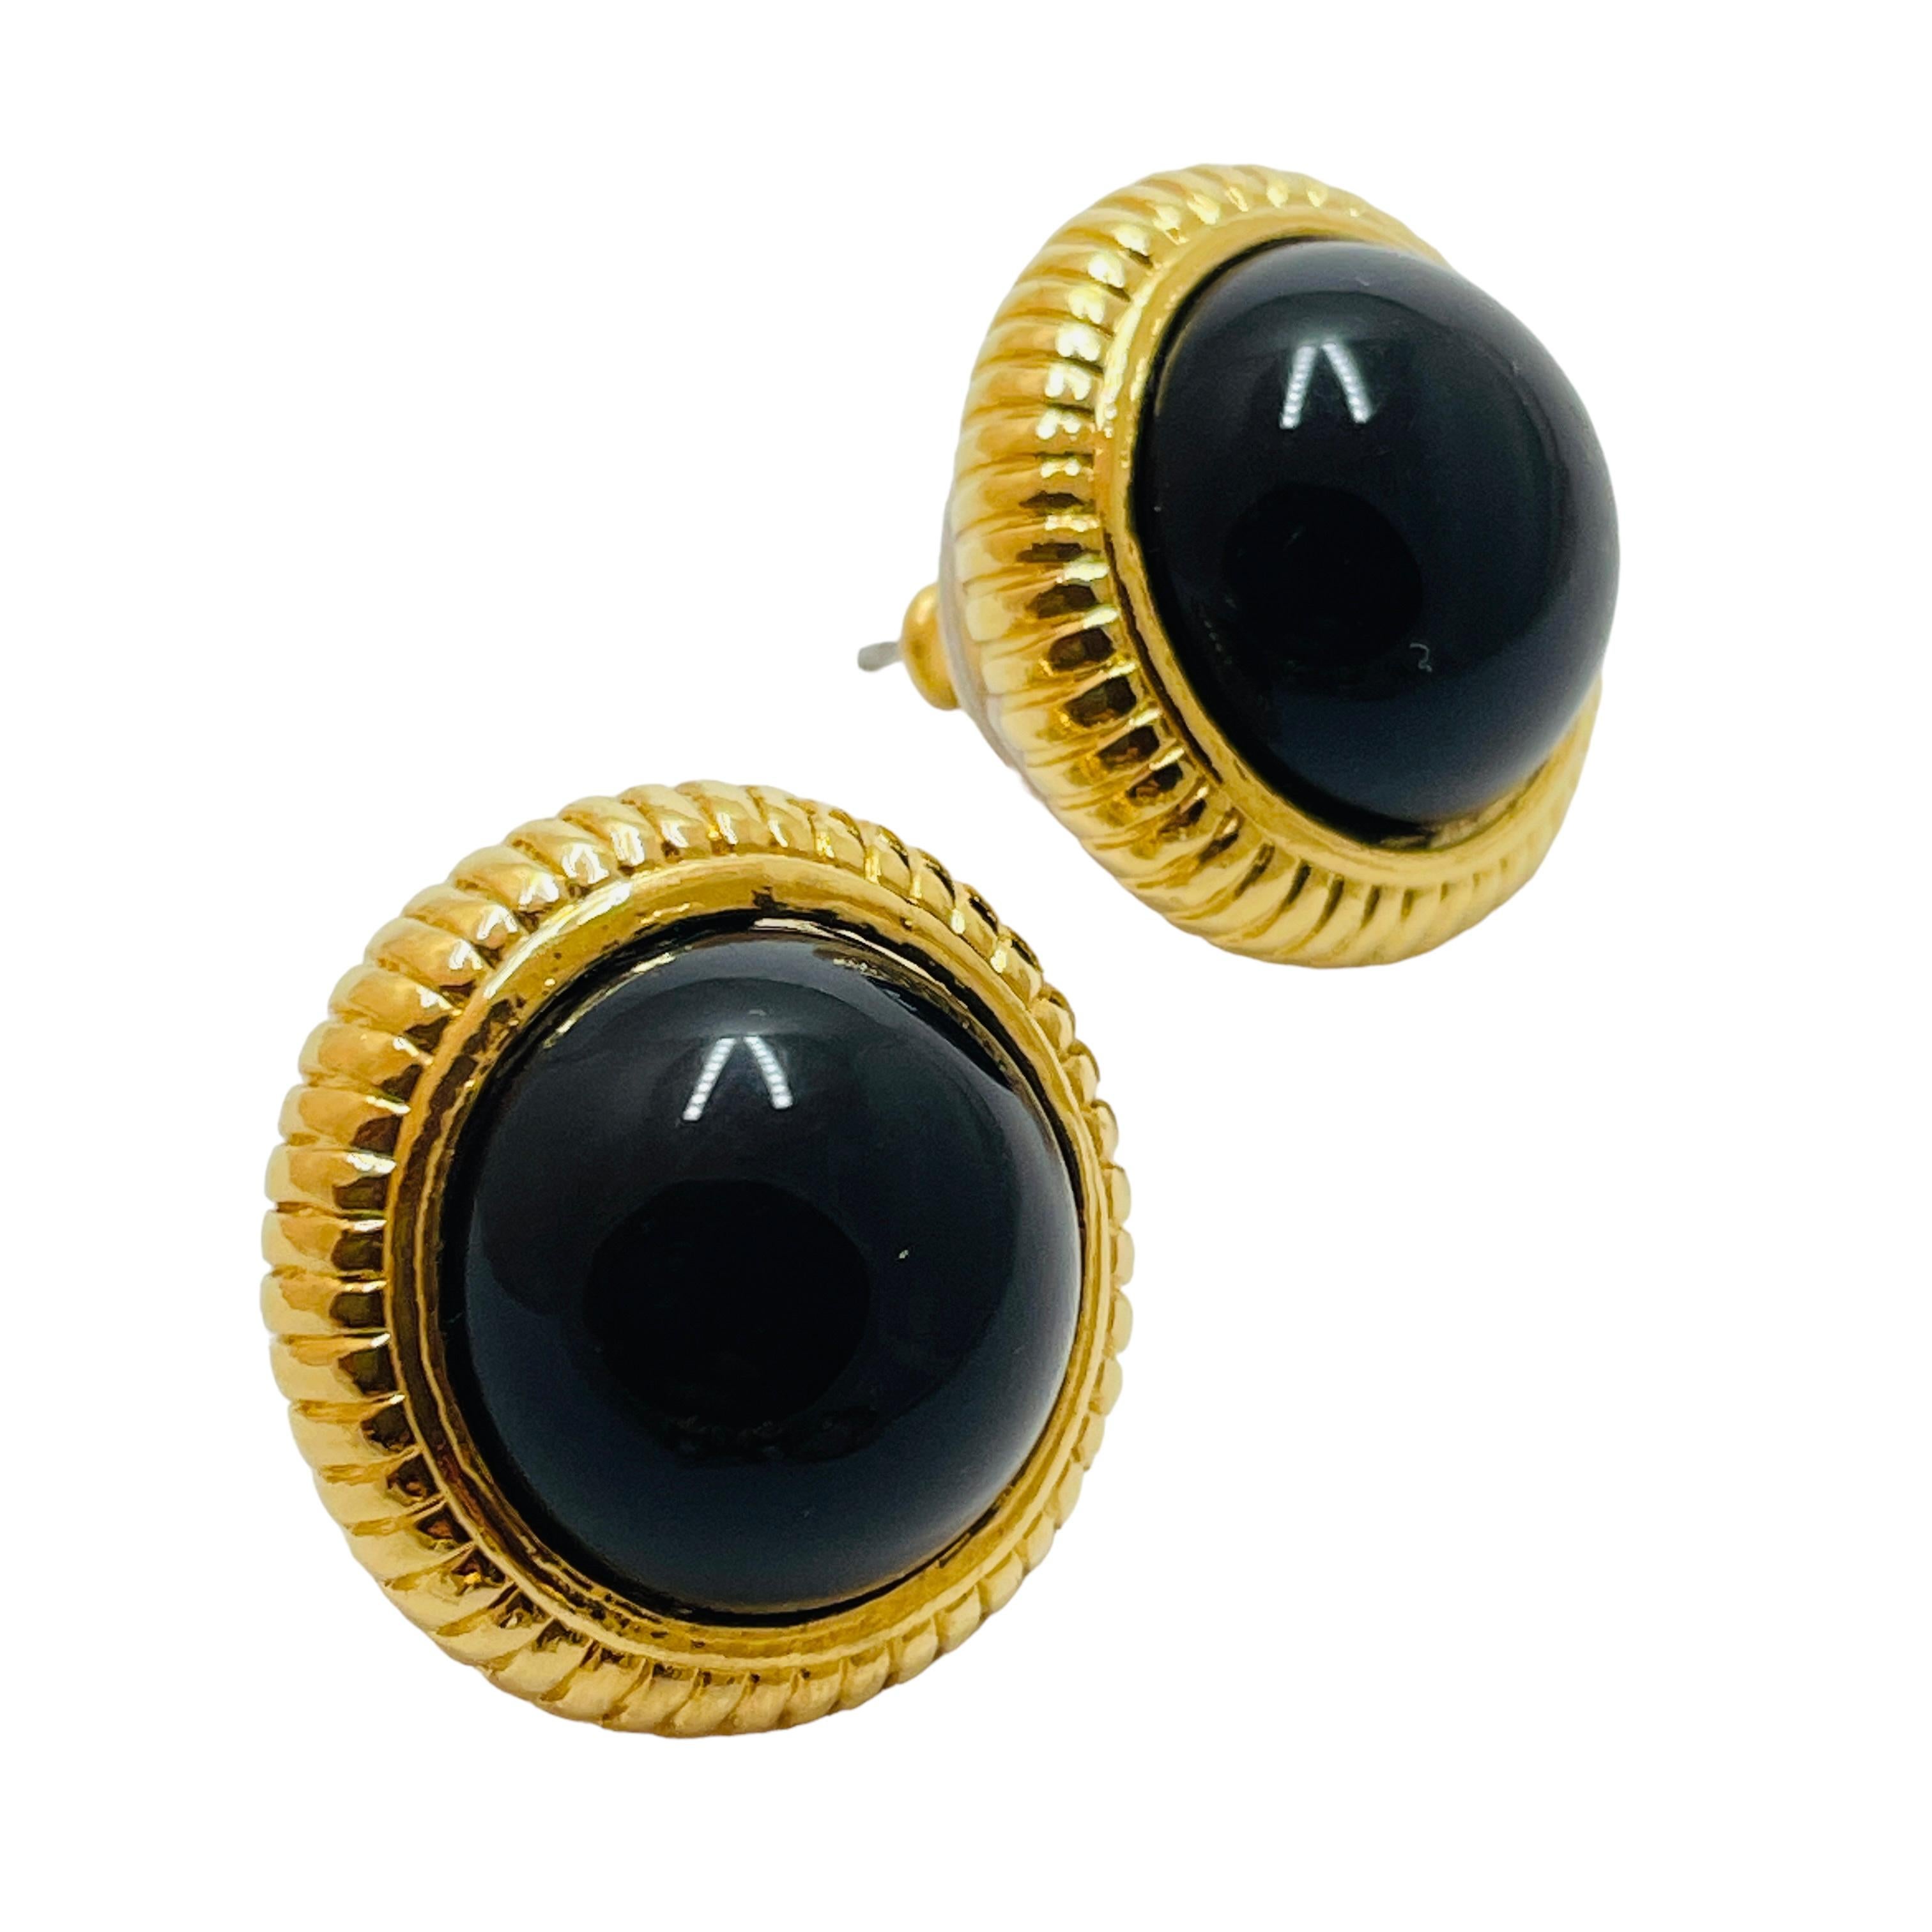 DETAILS

• unsigned 

• gold tone with black cabochons 

• vintage designer runway earrings  

MEASUREMENTS  

• 

CONDITION

•  very good vintage condition with minimal signs of wear 

 Sku 36

❤️❤️  VINTAGE DESIGNER JEWELRY  ❤️❤️

❤️❤️ 